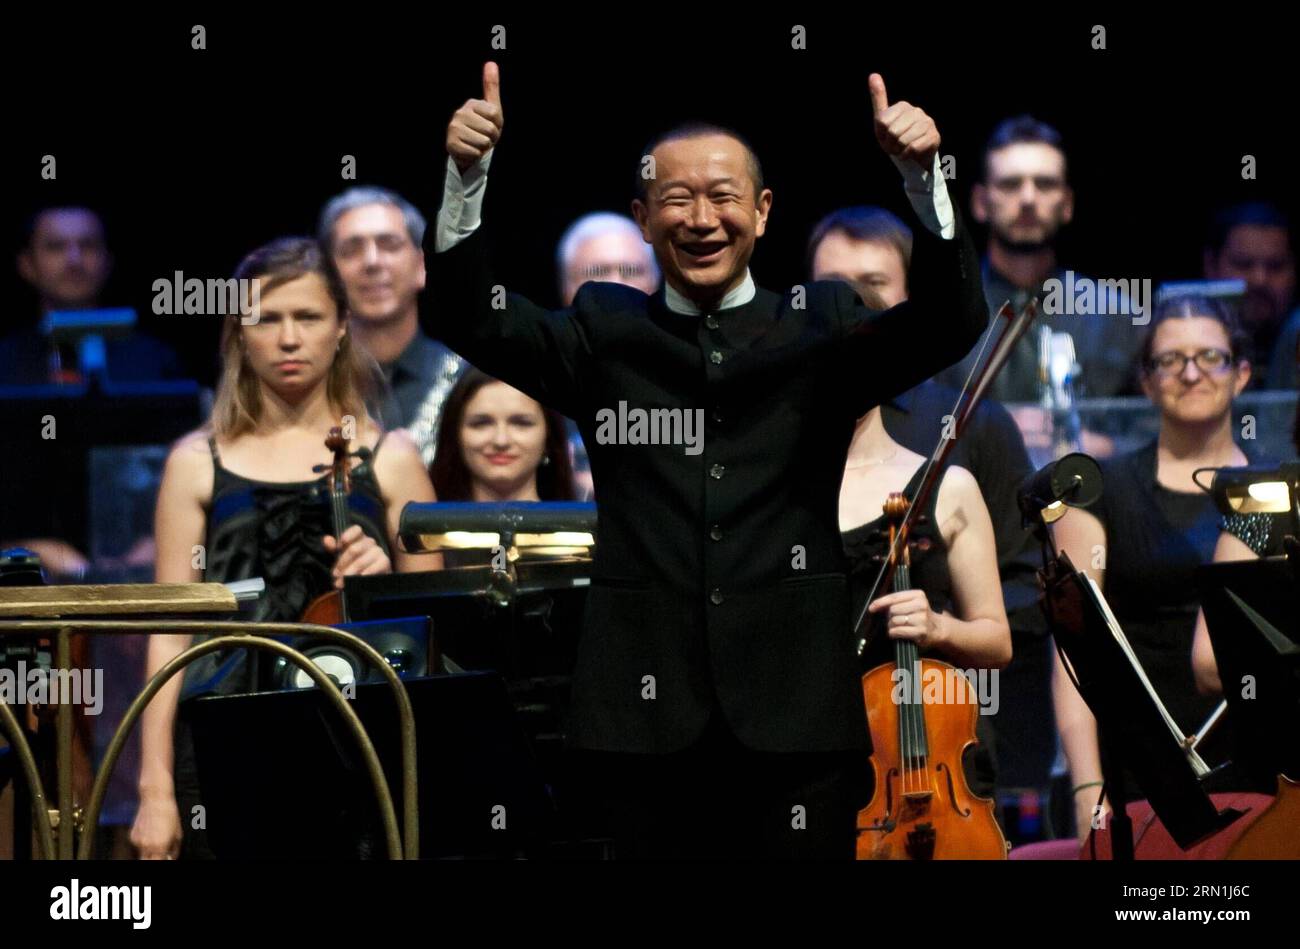 SANTIAGO, Jan. 4, 2015 -- Chinese composer Tan Dun gestures after directing the concert Trilogy of Martial Arts at the 22nd International Festival Santiago a Mil in Santiago, capital of Chile, on Jan. 4, 2015. The concert Trilogy of Martial Arts is composed of songs that belong to the original soundtracks of the movies Hero of Zhang Yimou, Crouching Tiger, Hidden Dragon of Ang Lee, and The Banquet of Feng Xiaogang. The 16-day festival was opened on Jan. 3 to stage over 90 shows. ) (da) CHILE-CHINA-CULTURE-TAN DUN JORGExVILLEGAS PUBLICATIONxNOTxINxCHN   Santiago Jan 4 2015 Chinese Composer TAN Stock Photo